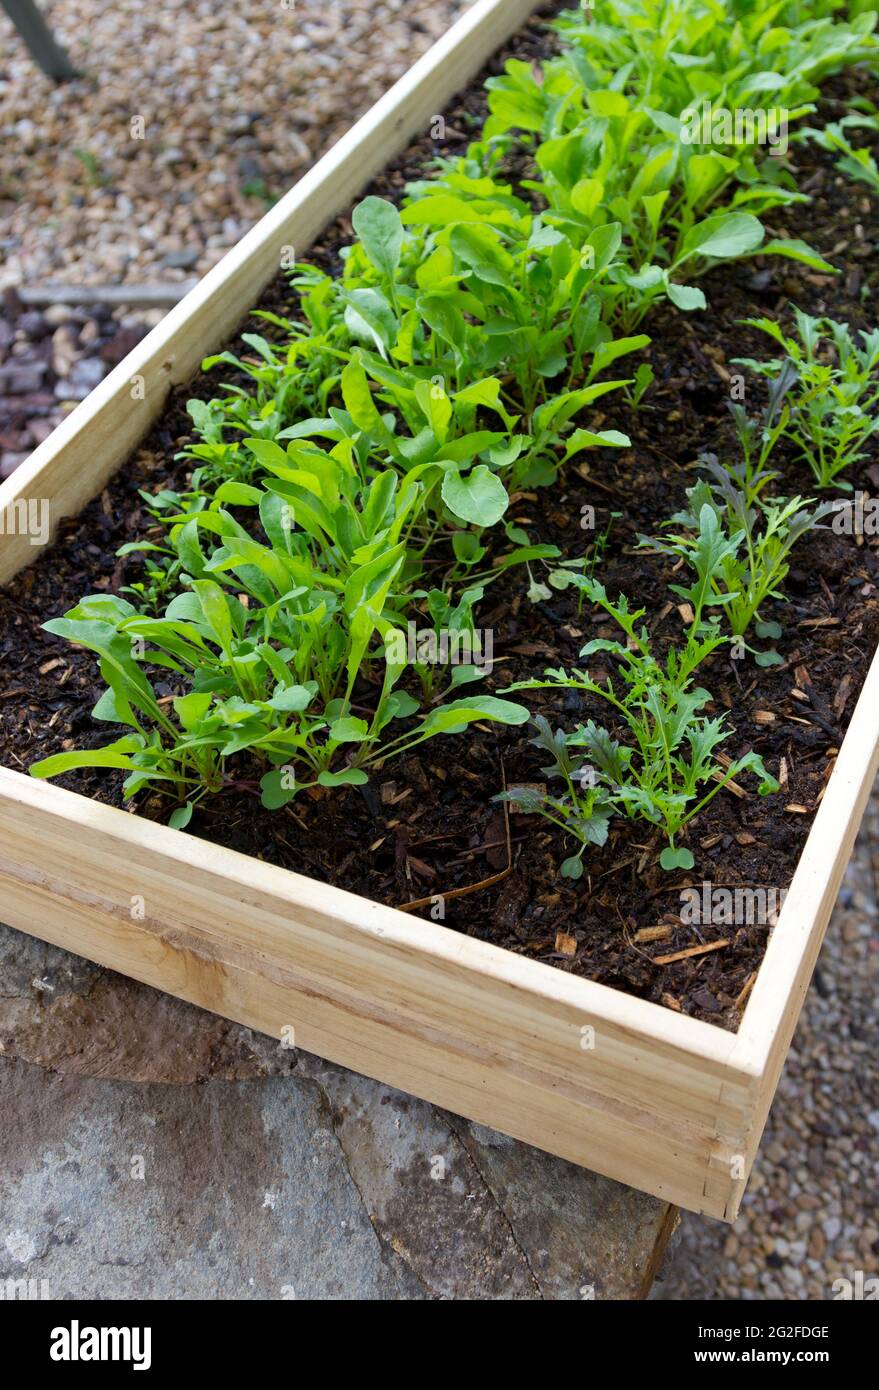 Young salad growing in an old wooden drawer. Stock Photo